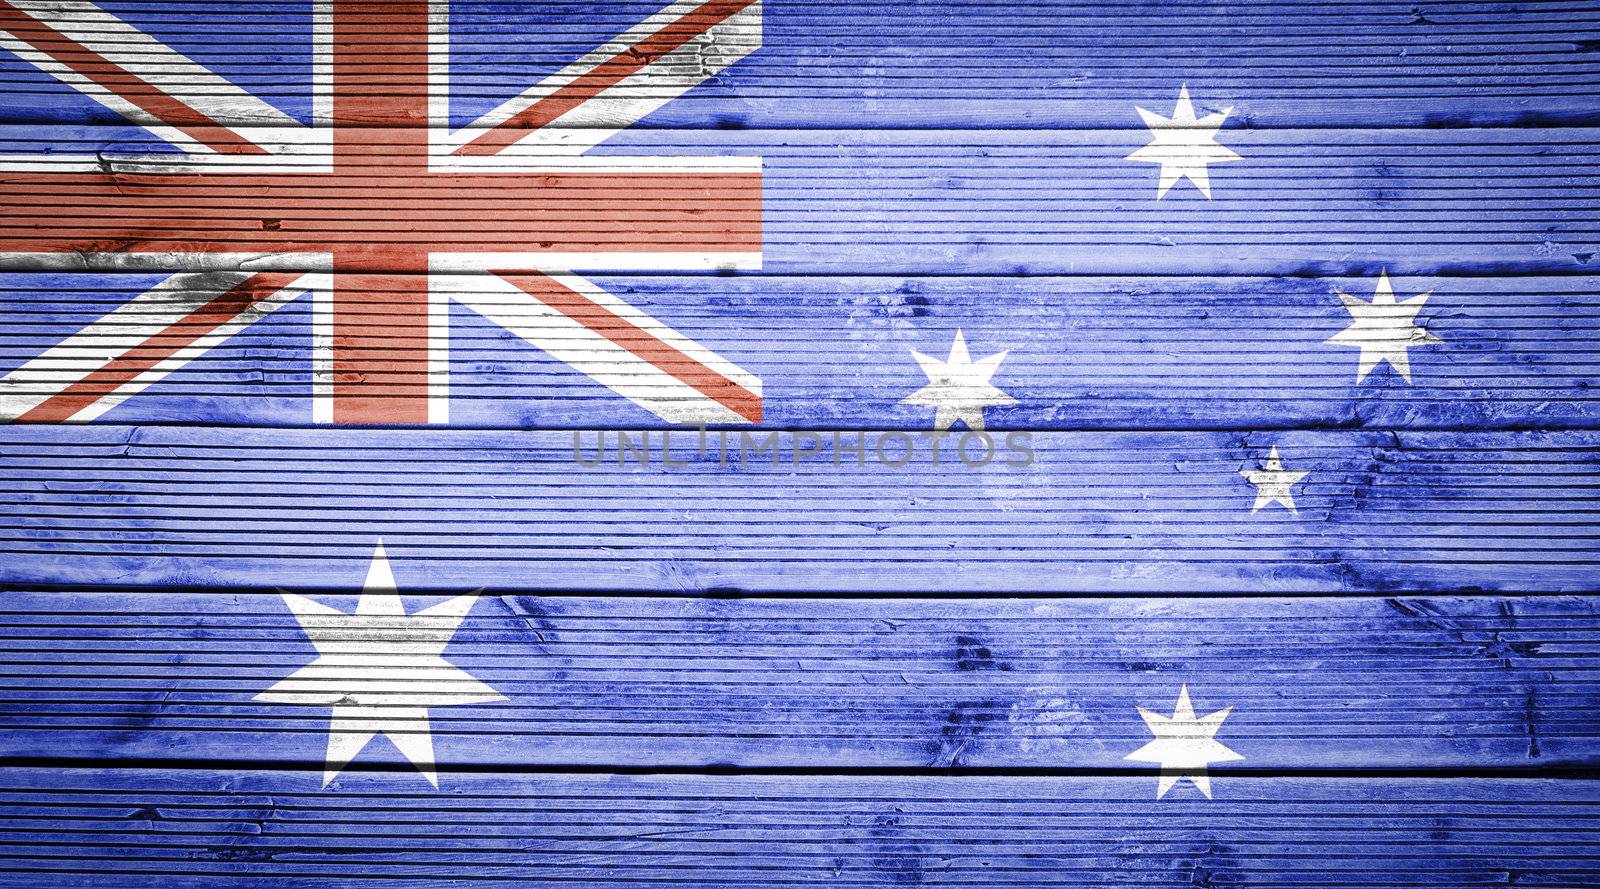 Wood texture background with colors of the flag of Australia by doble.d